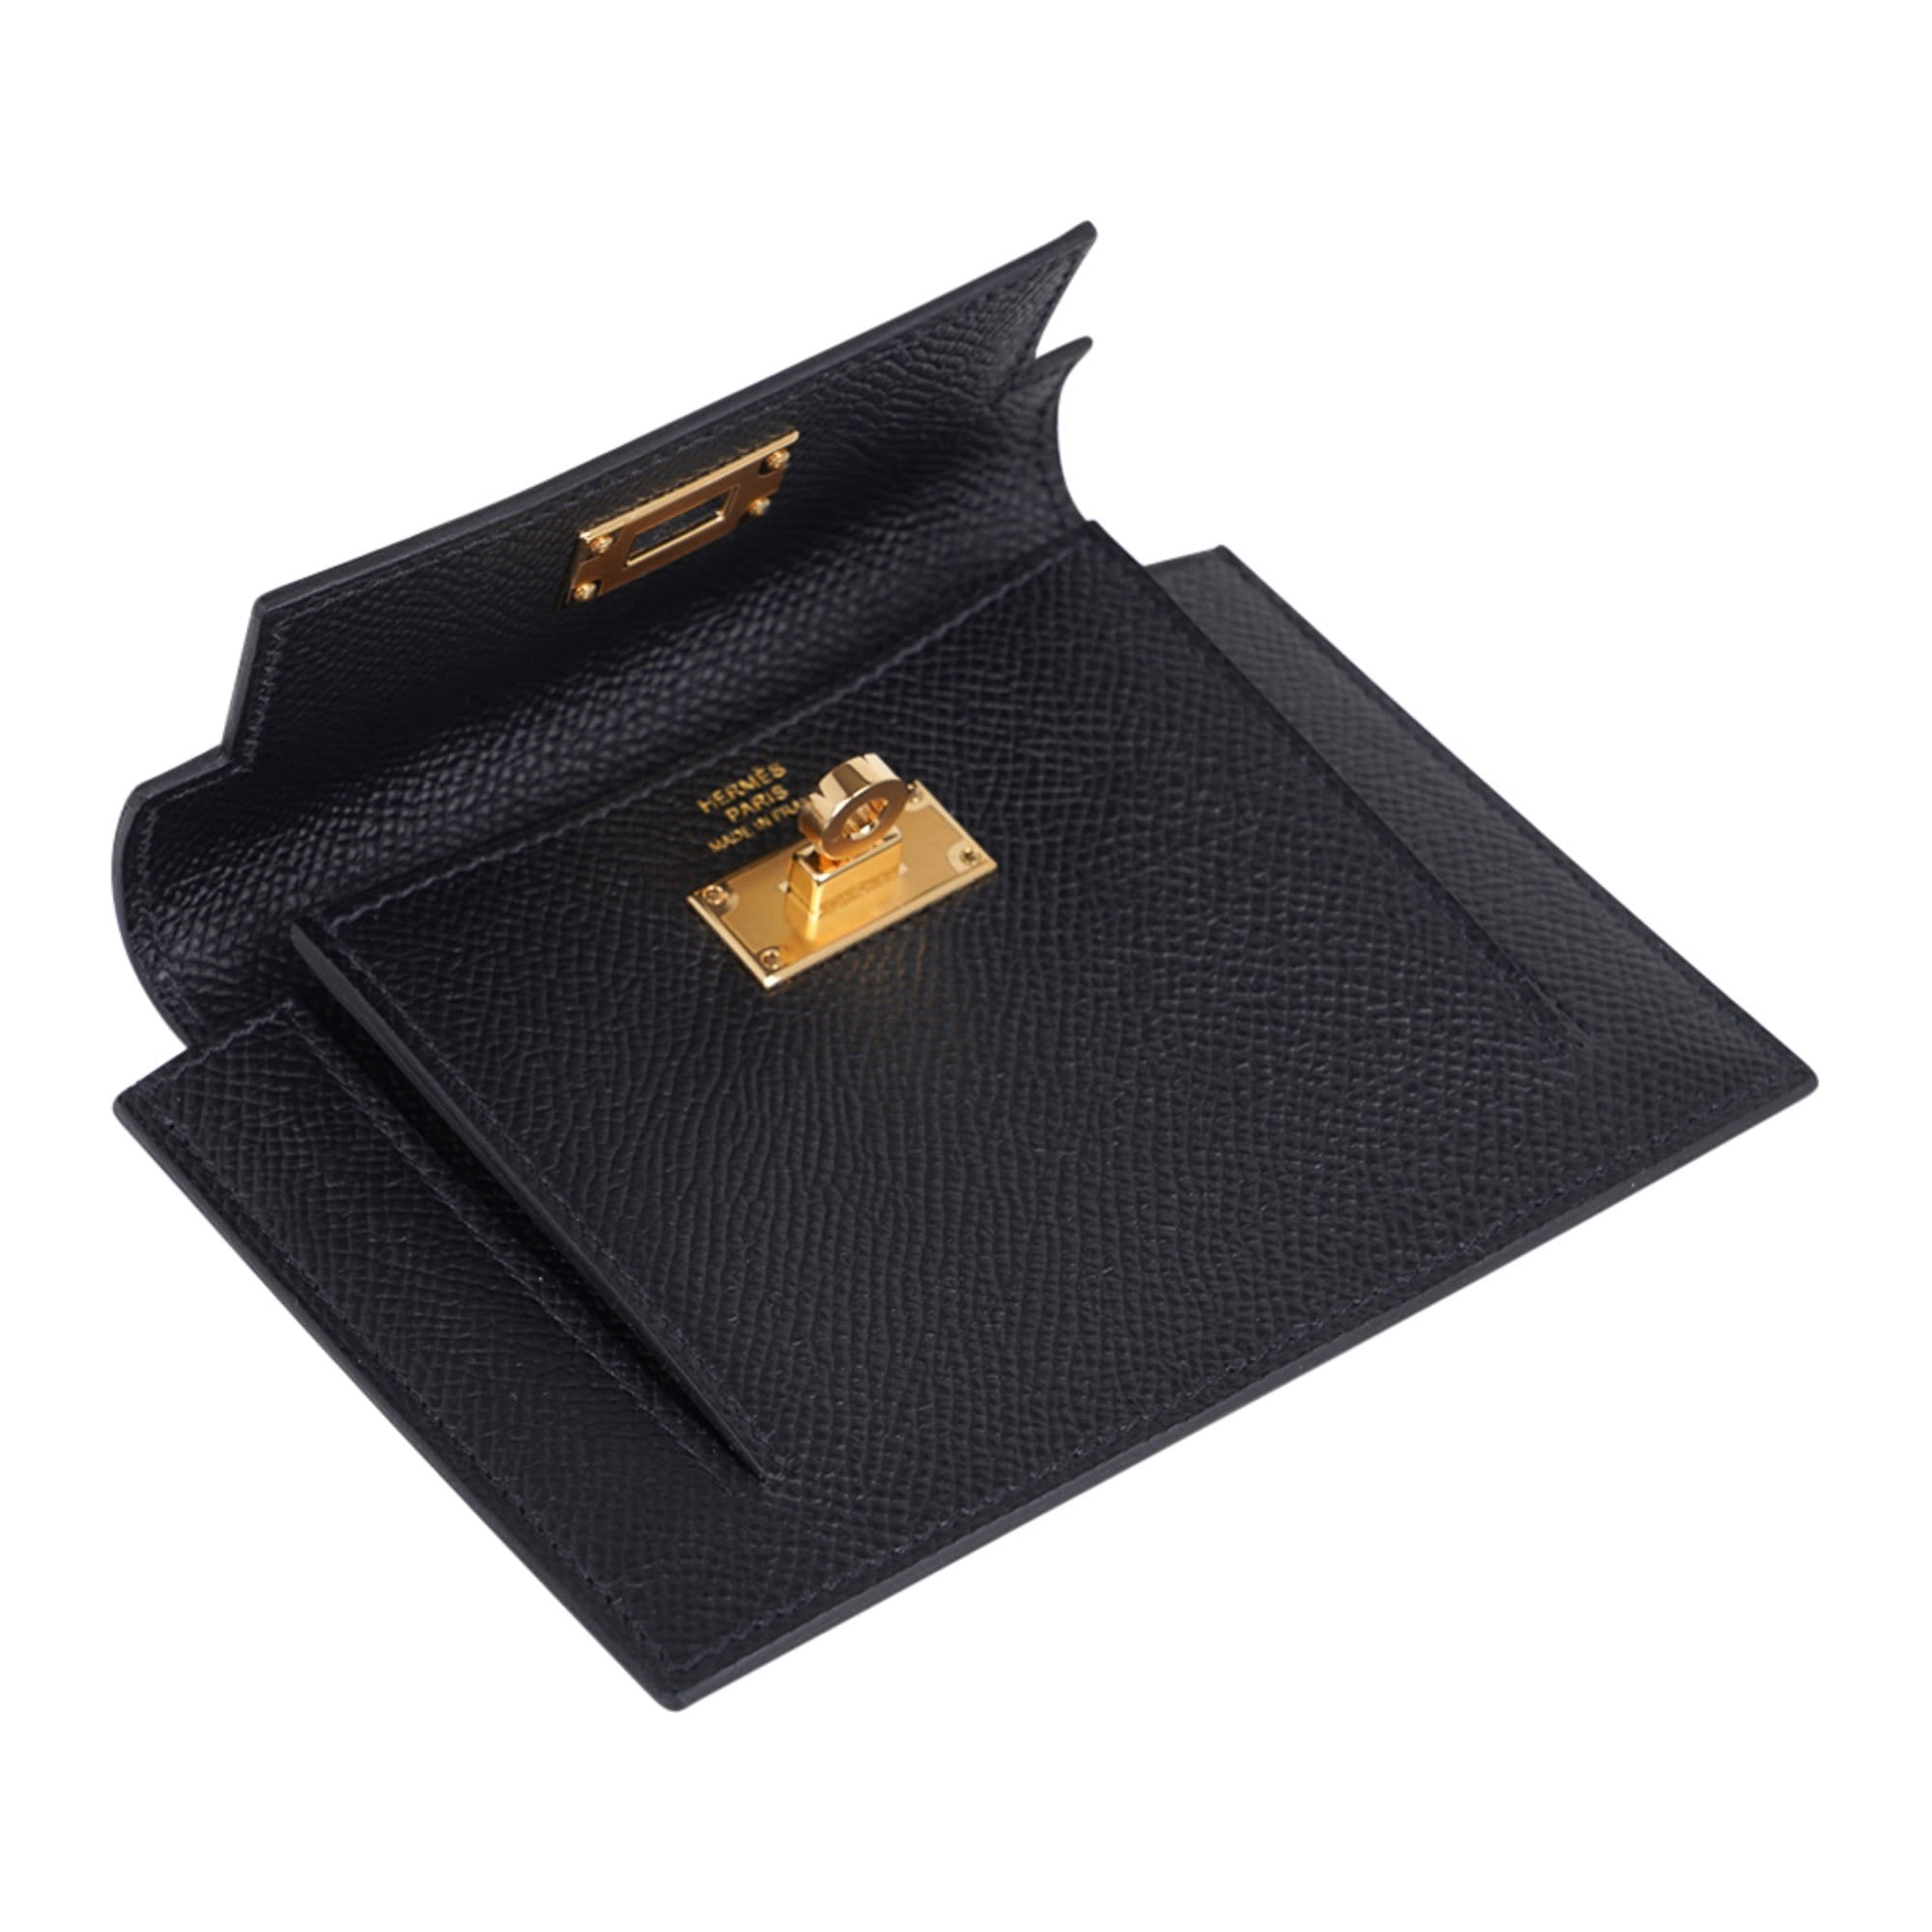 Hermes Kelly Pocket Compact Wallet Noir Gold Hardware New w/Box